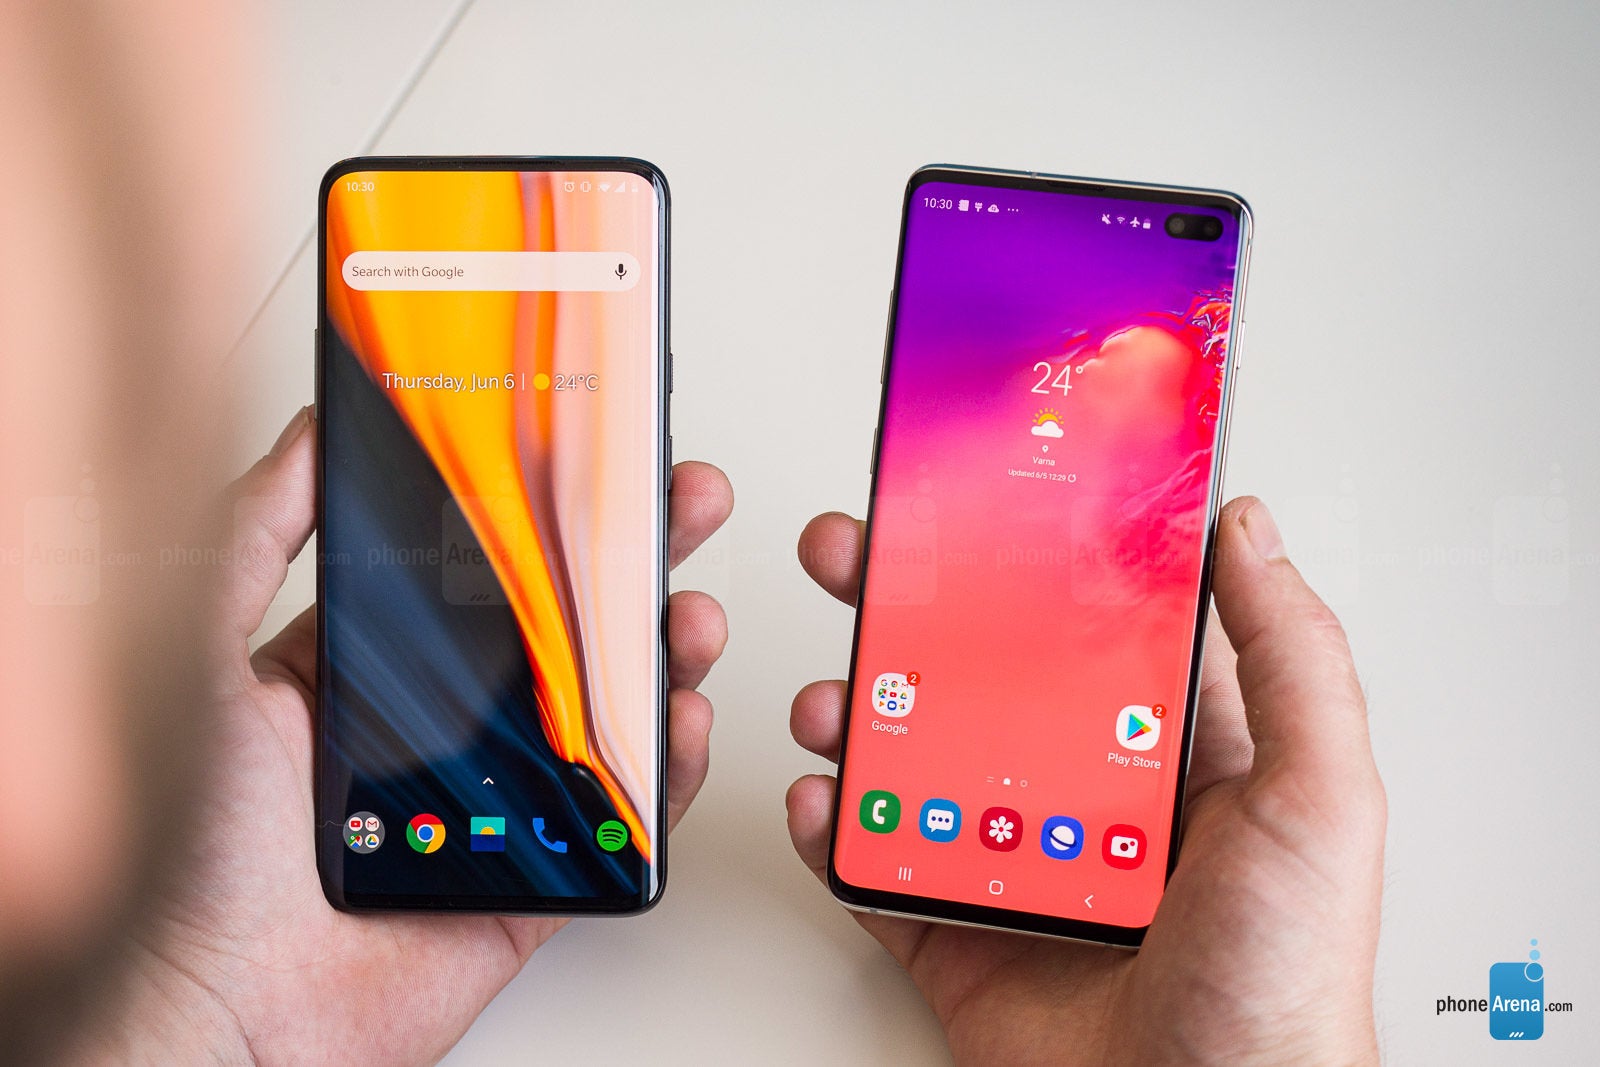 OnePlus 7 Pro vs Samsung Galaxy S10+: edging it out